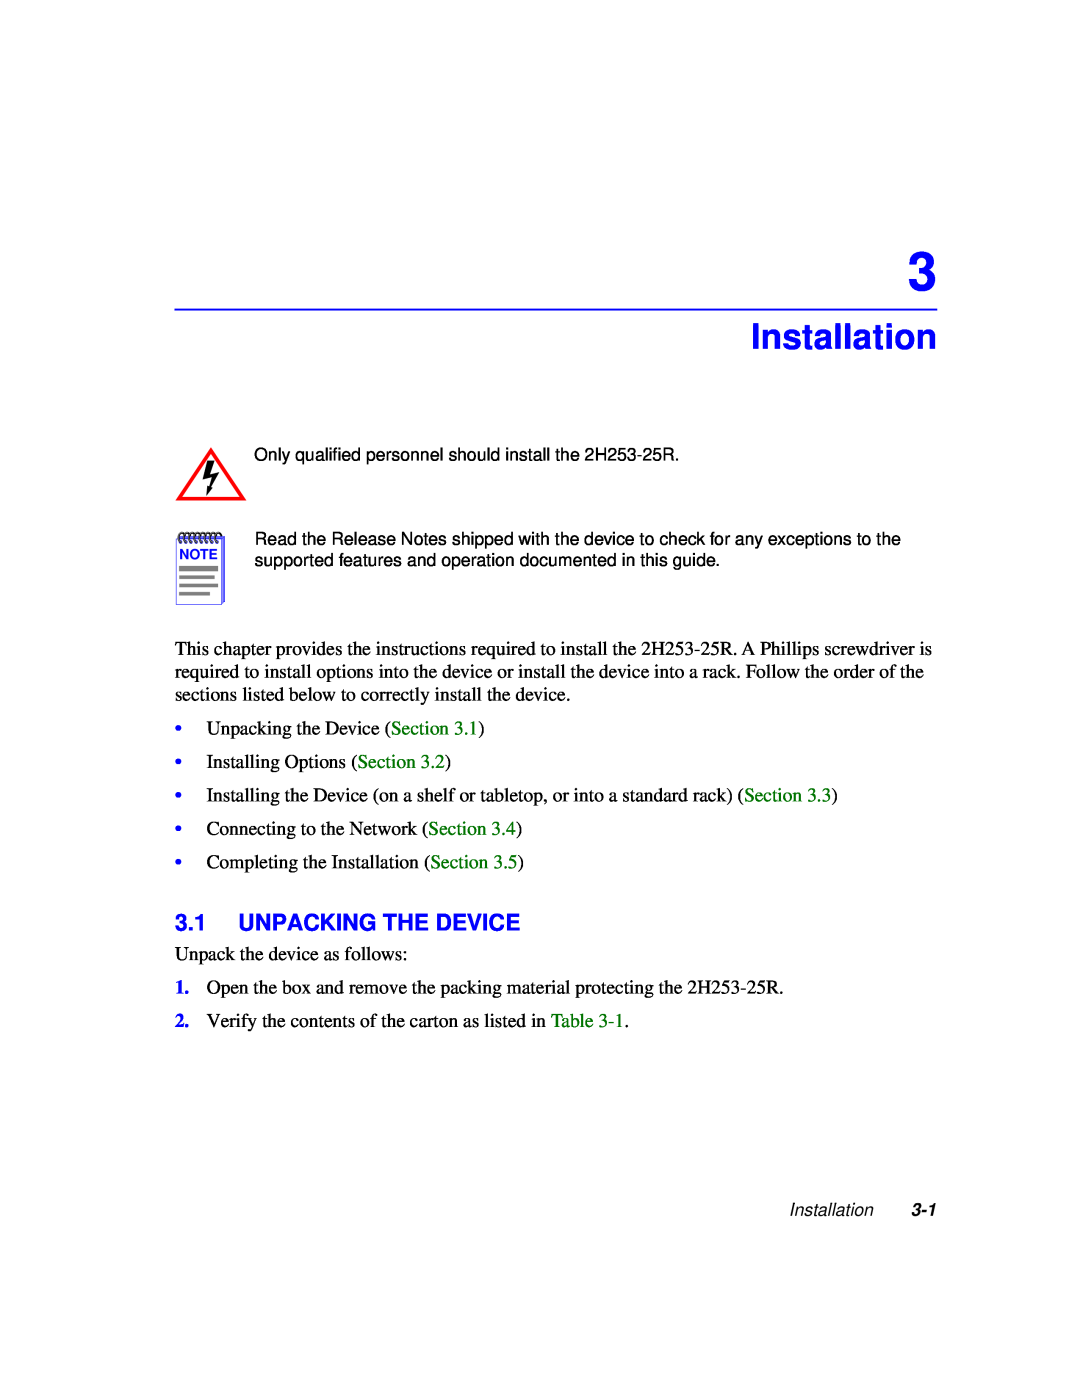 Cabletron Systems 2H253-25R manual Installation, Unpacking The Device 